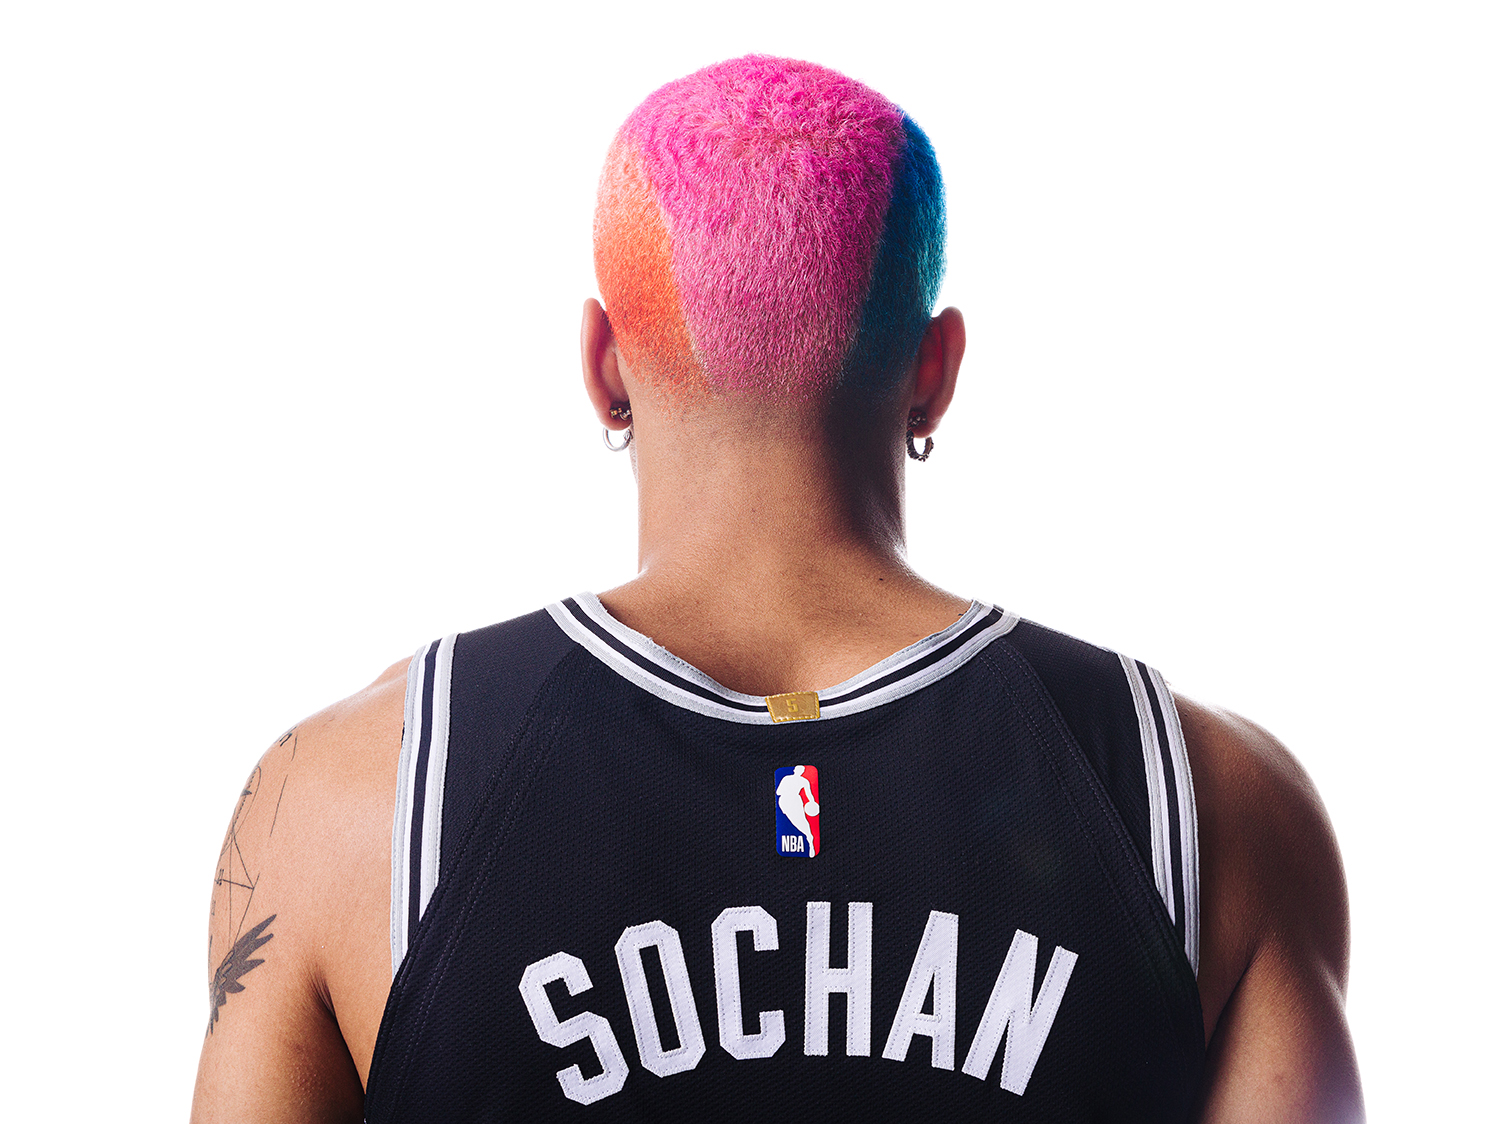 Jeremy Sochan, a forward for the San Antonio Spurs photographed by portrait and sports photographer Josh Huskin